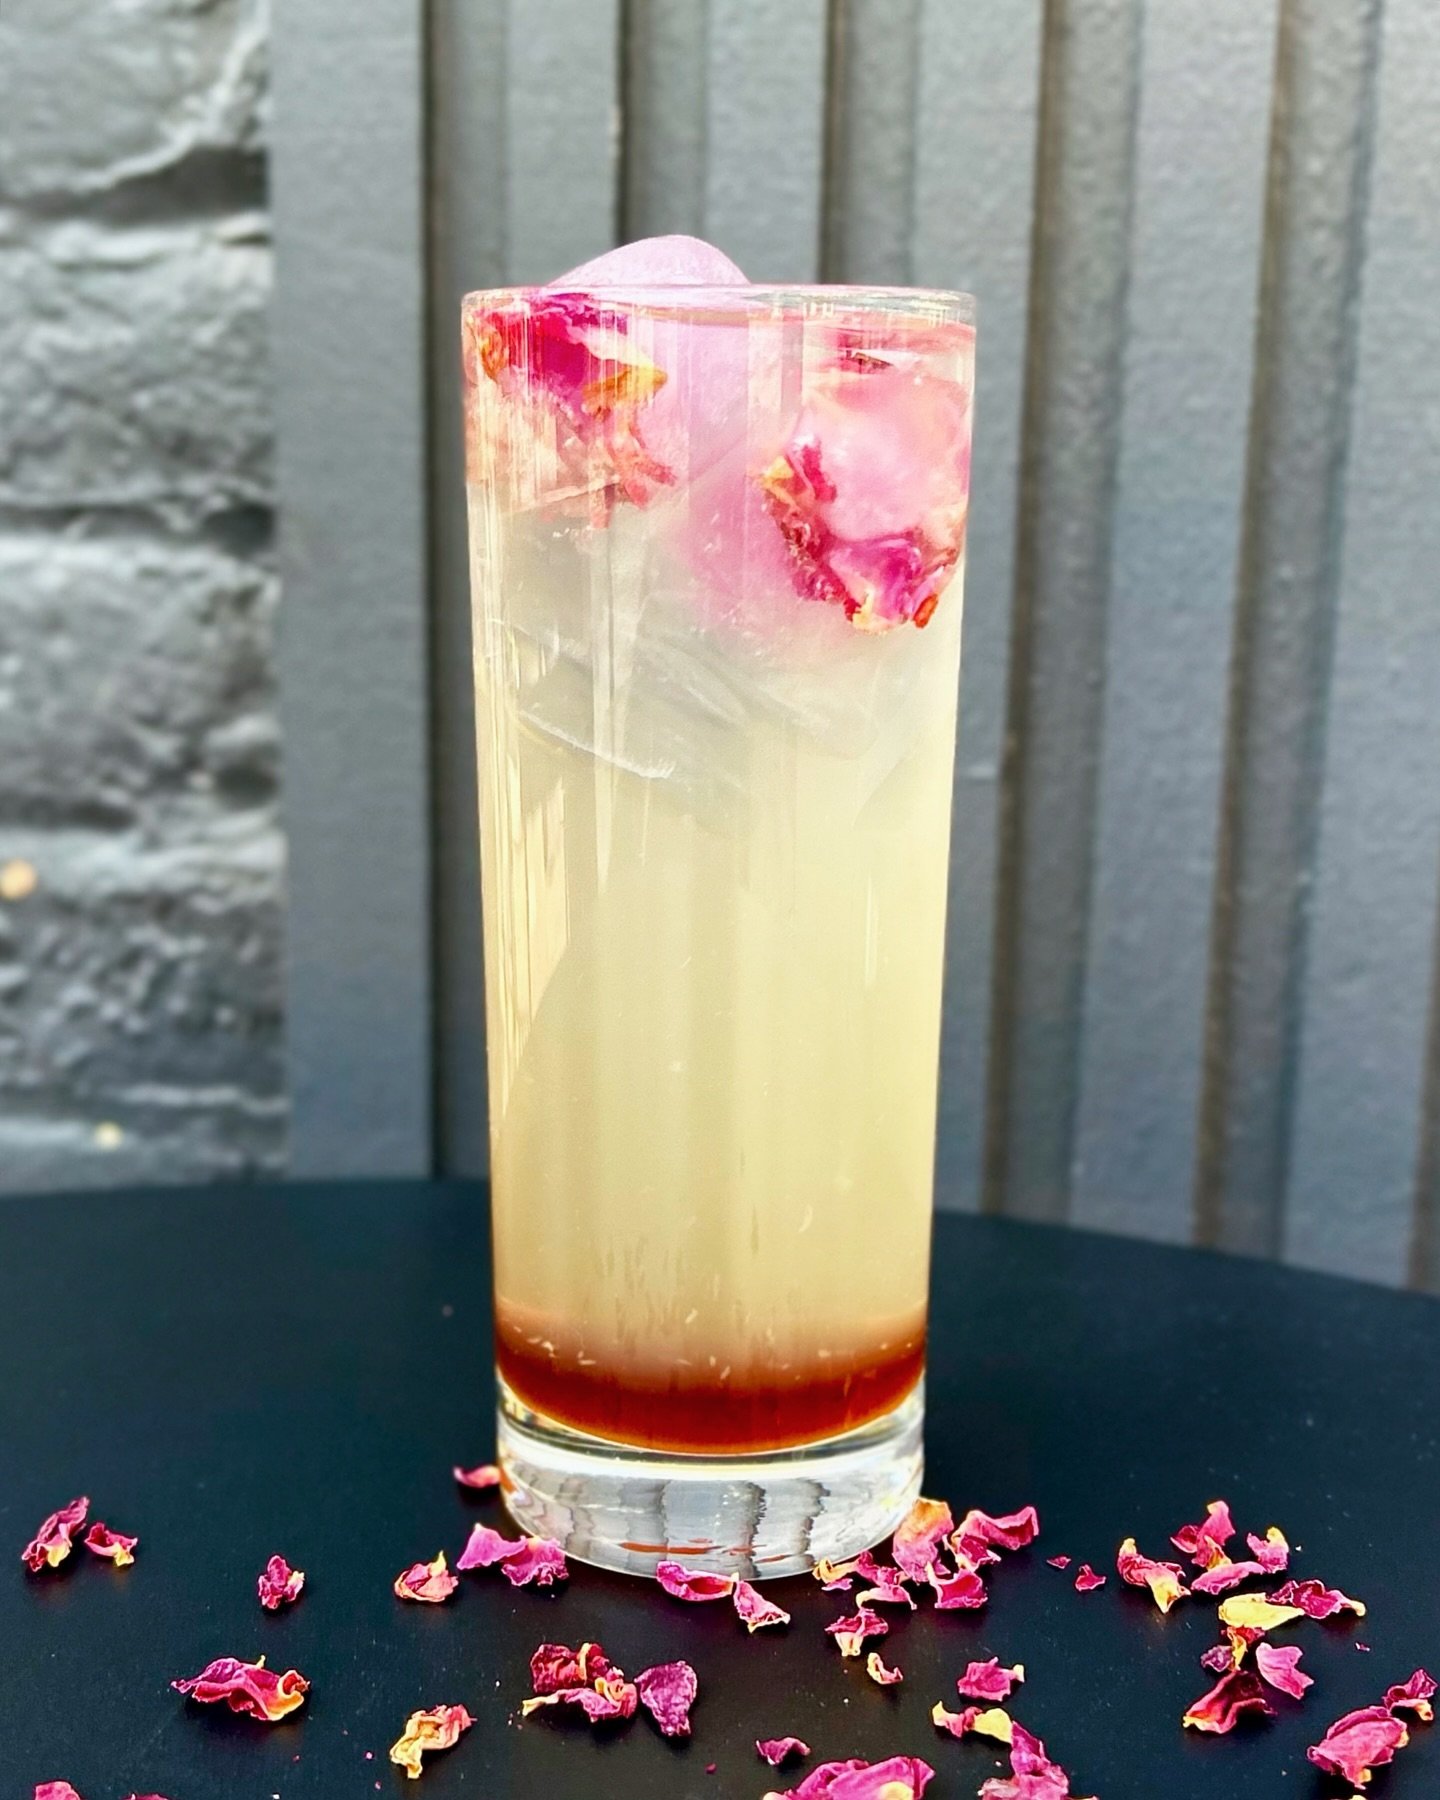 Feeling knackered this Monday? 🥱 Try the Royal Lemonade, but make it Dirty 🤭 (dirty = espresso)
Made w/ Housemade Earl Grey Rose syrup!

#cannoncoffee #coffee #coffeeshop #specialtycoffee #royal #lemonade #dirty